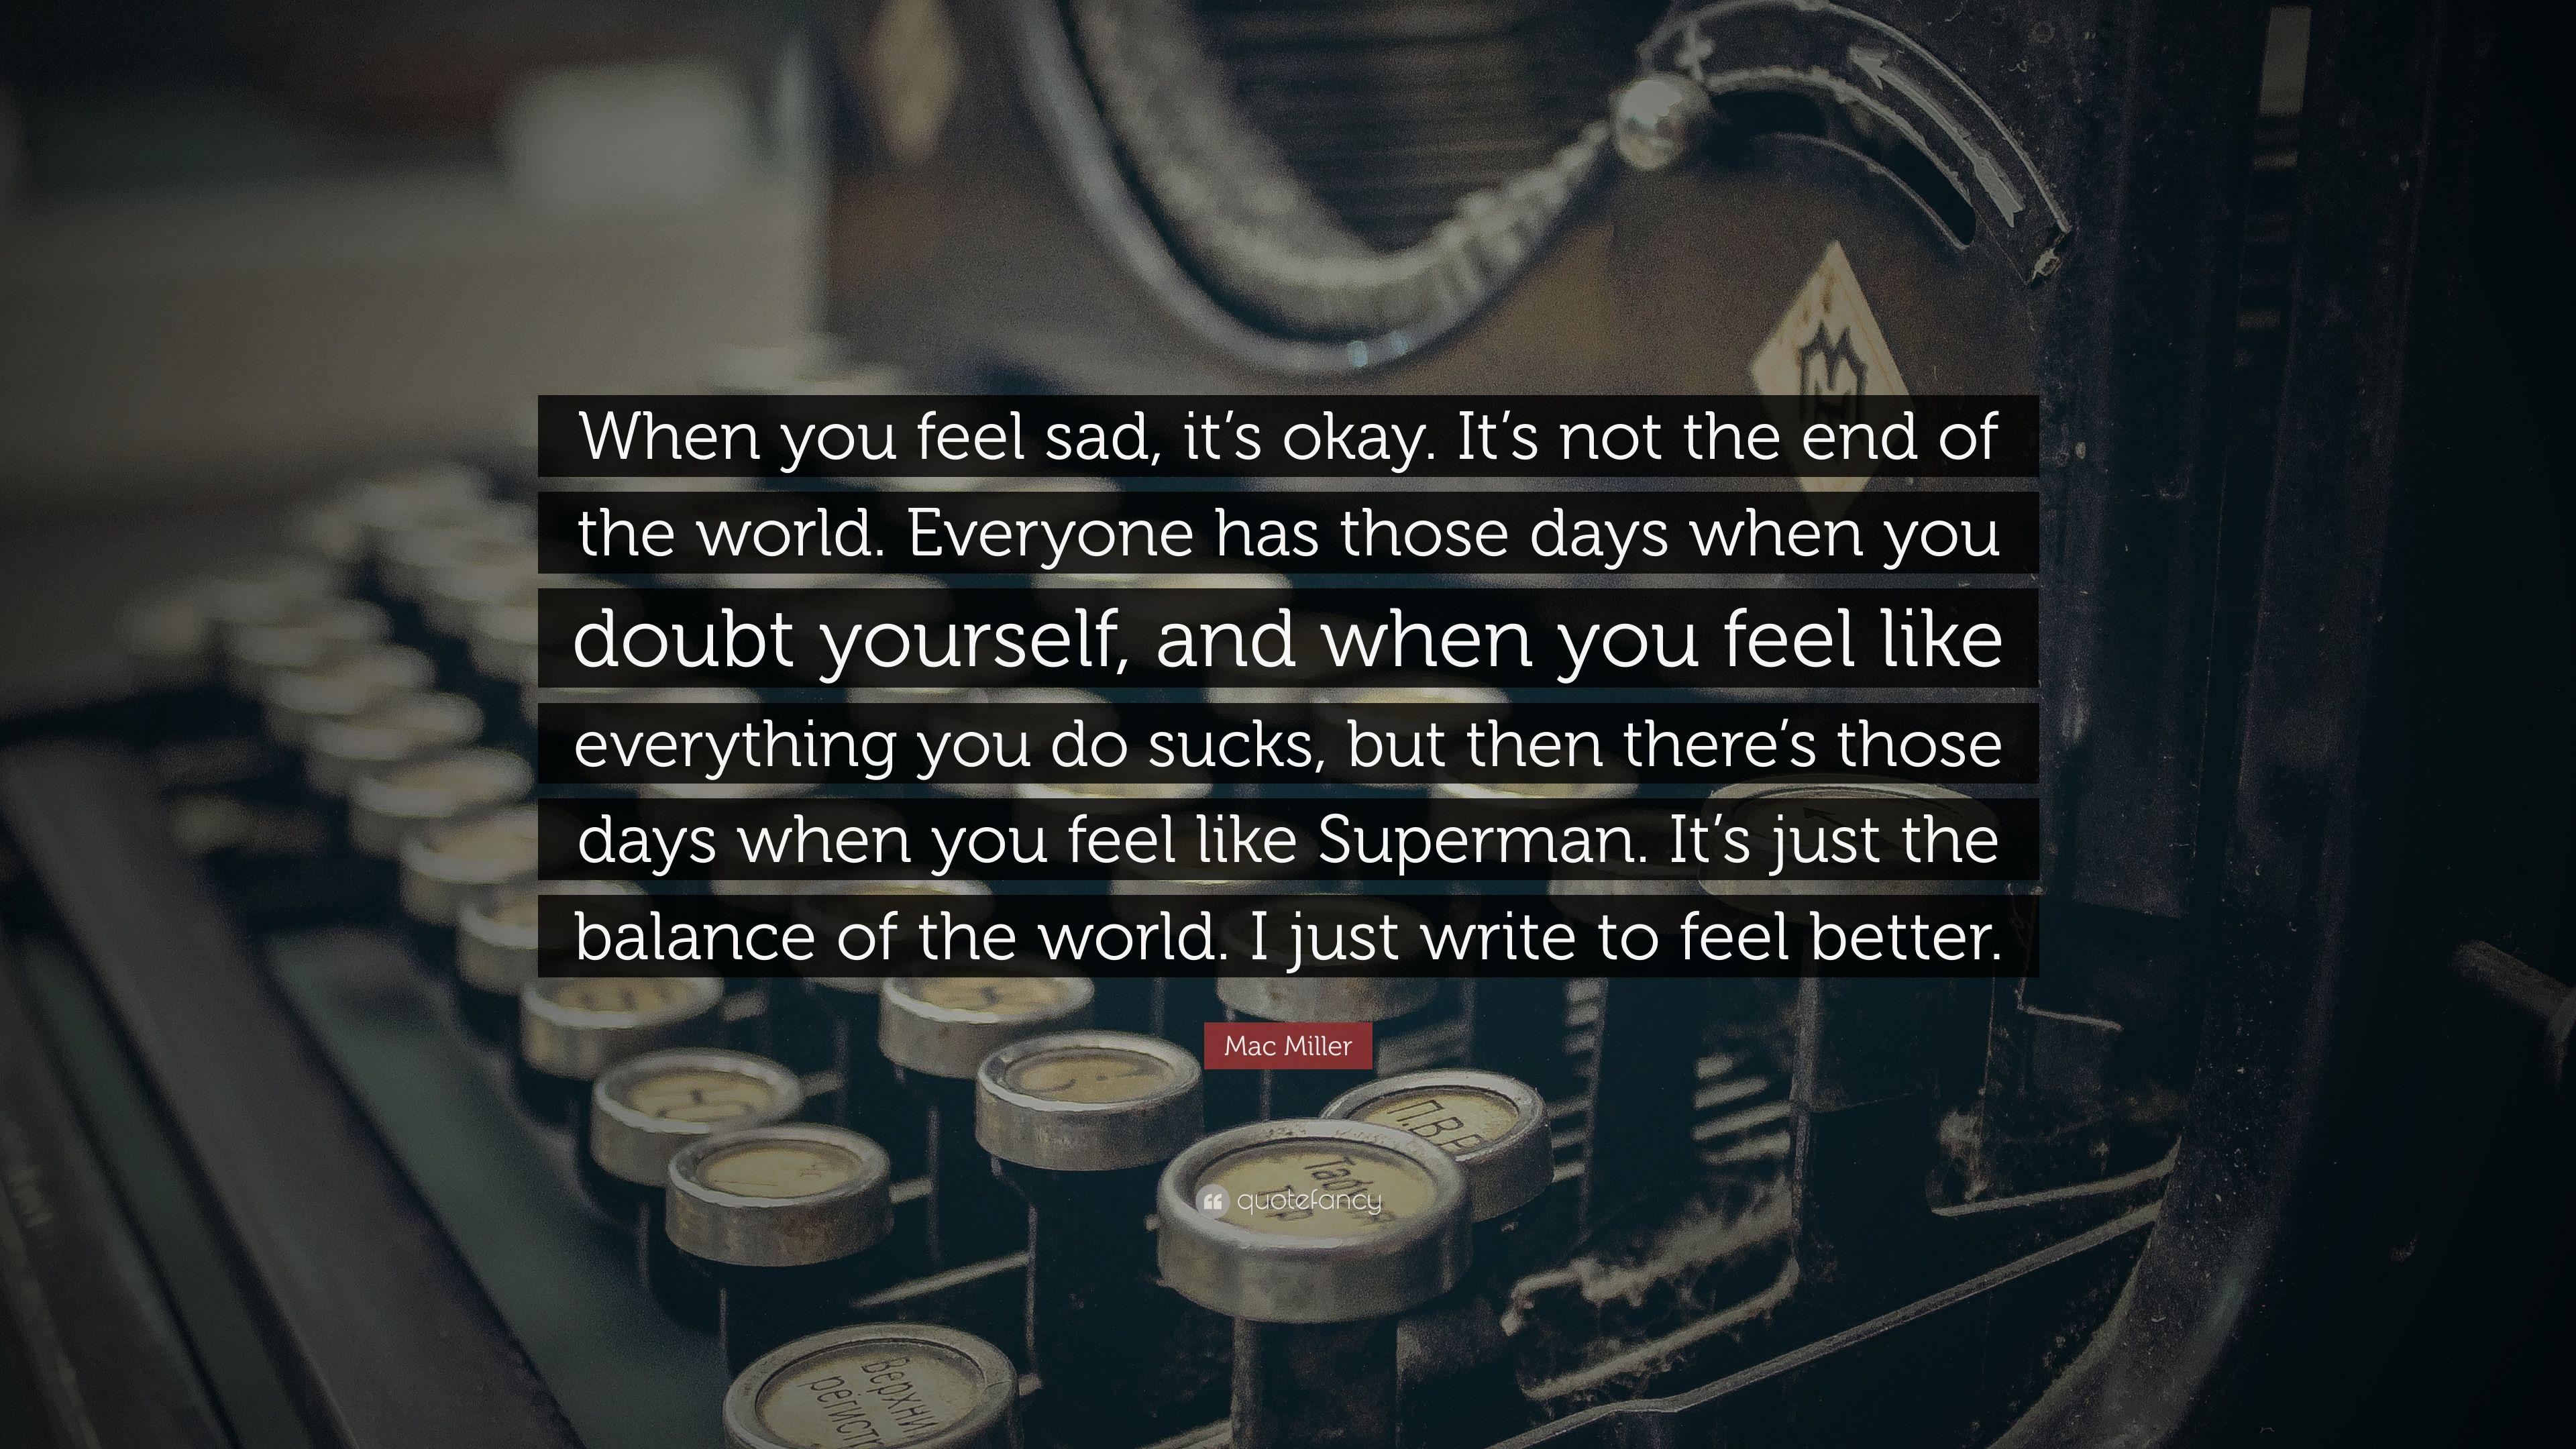 Mac Miller Quote: “When you feel sad, it's okay. It's not the end of the world. Everyone has those days when you doubt yourself, and when y.” (7 wallpaper)